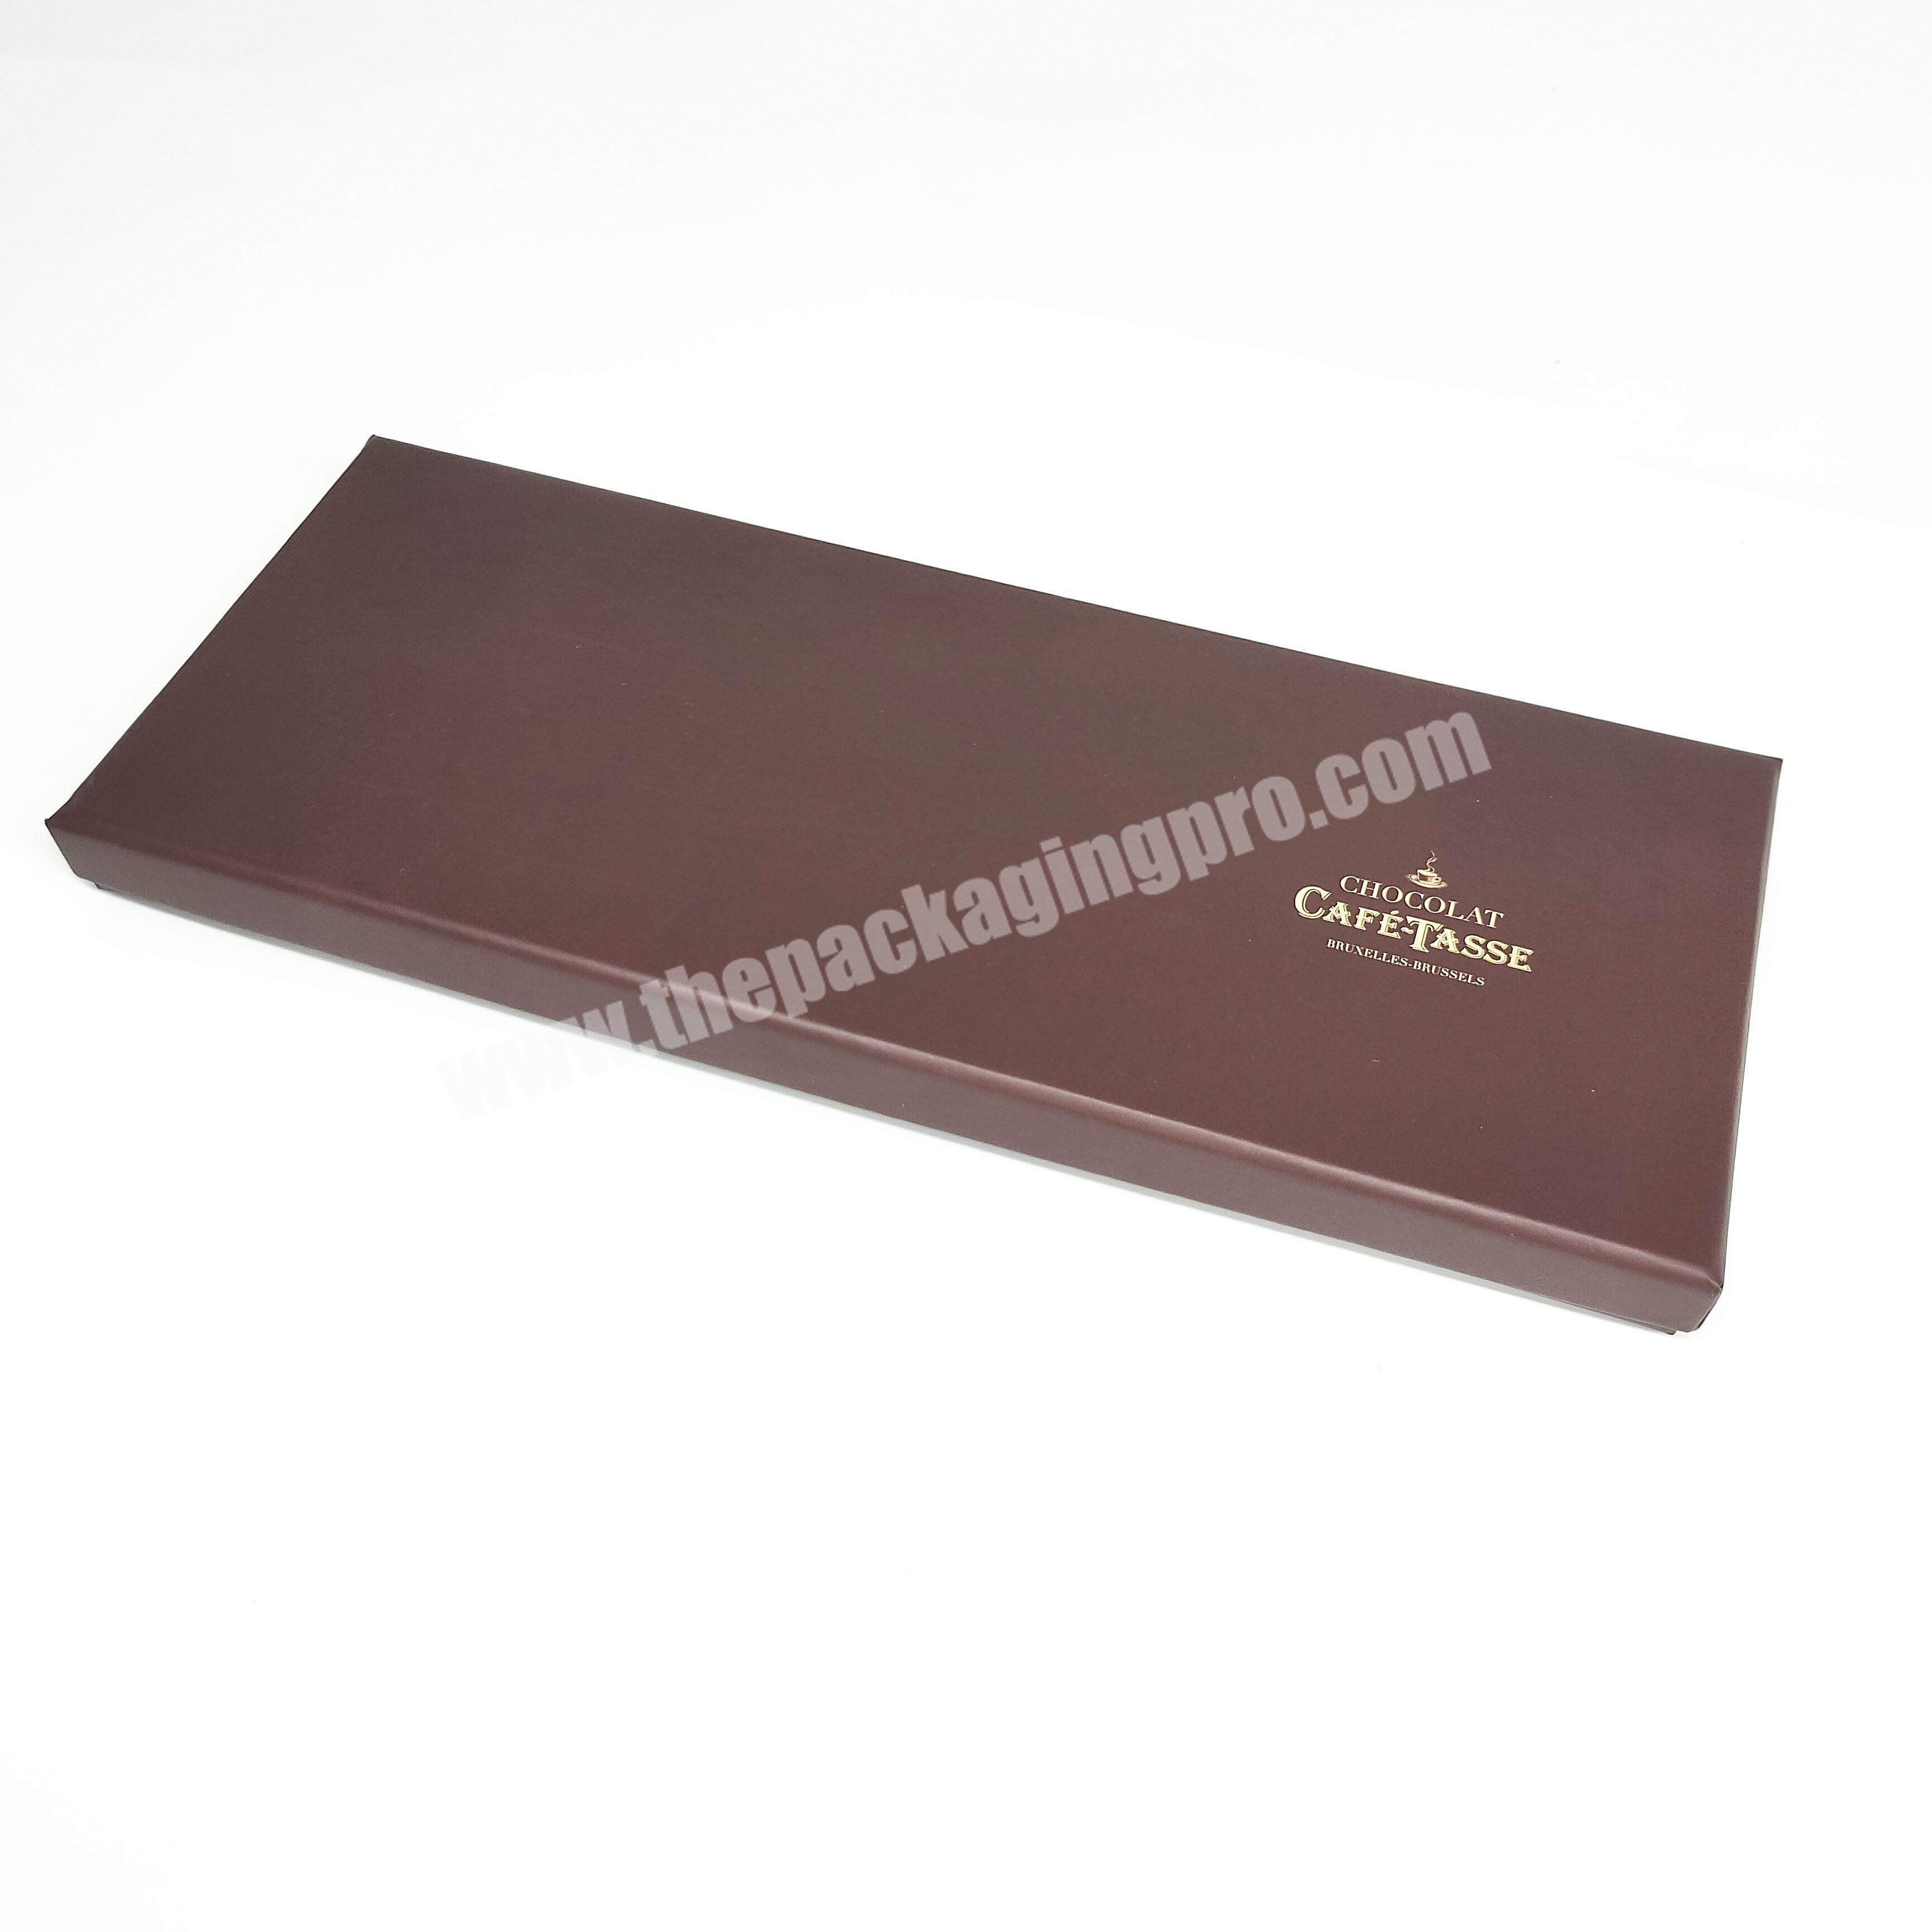 Paper Luxury  Custom Print Wall Craft Item Industrial Surface Packing Packaging Cookie Chocolate Gift Box